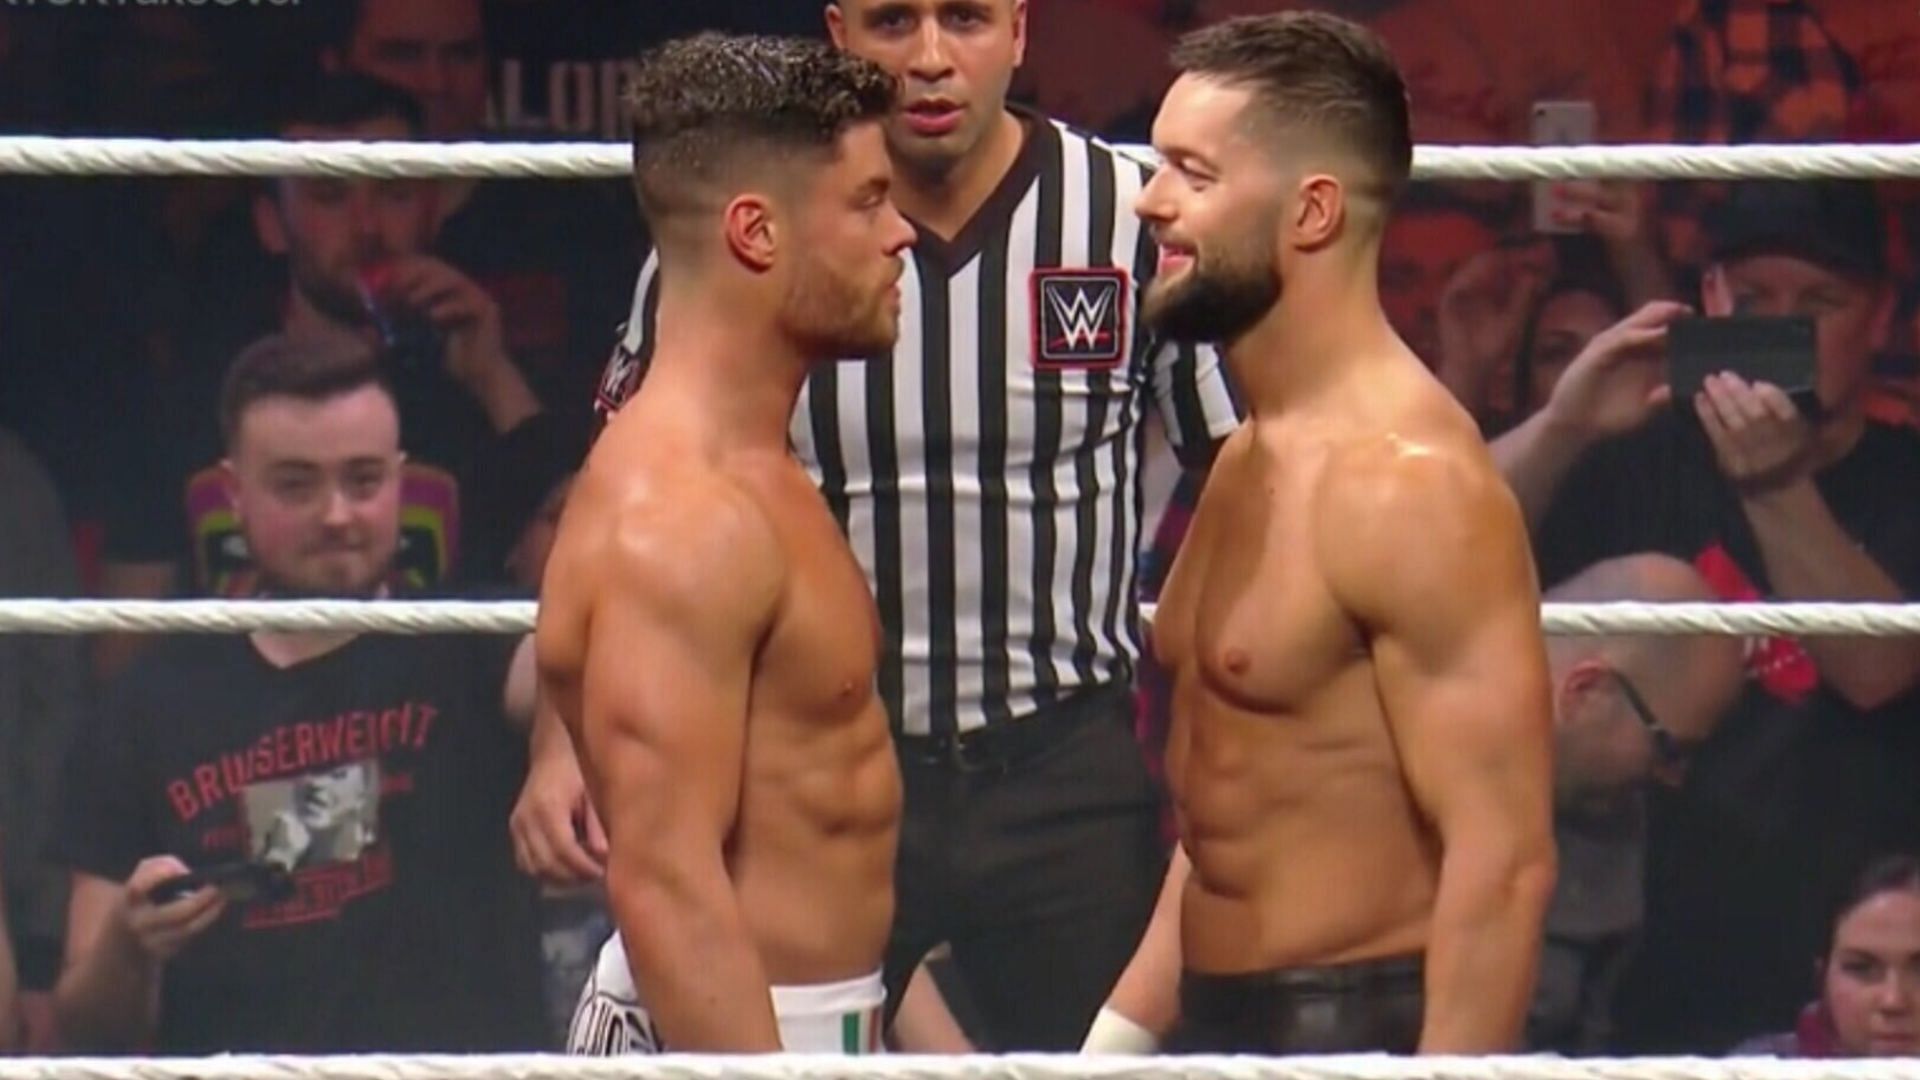 JD McDonagh and Finn Balor are no strangers inside the squared circle.